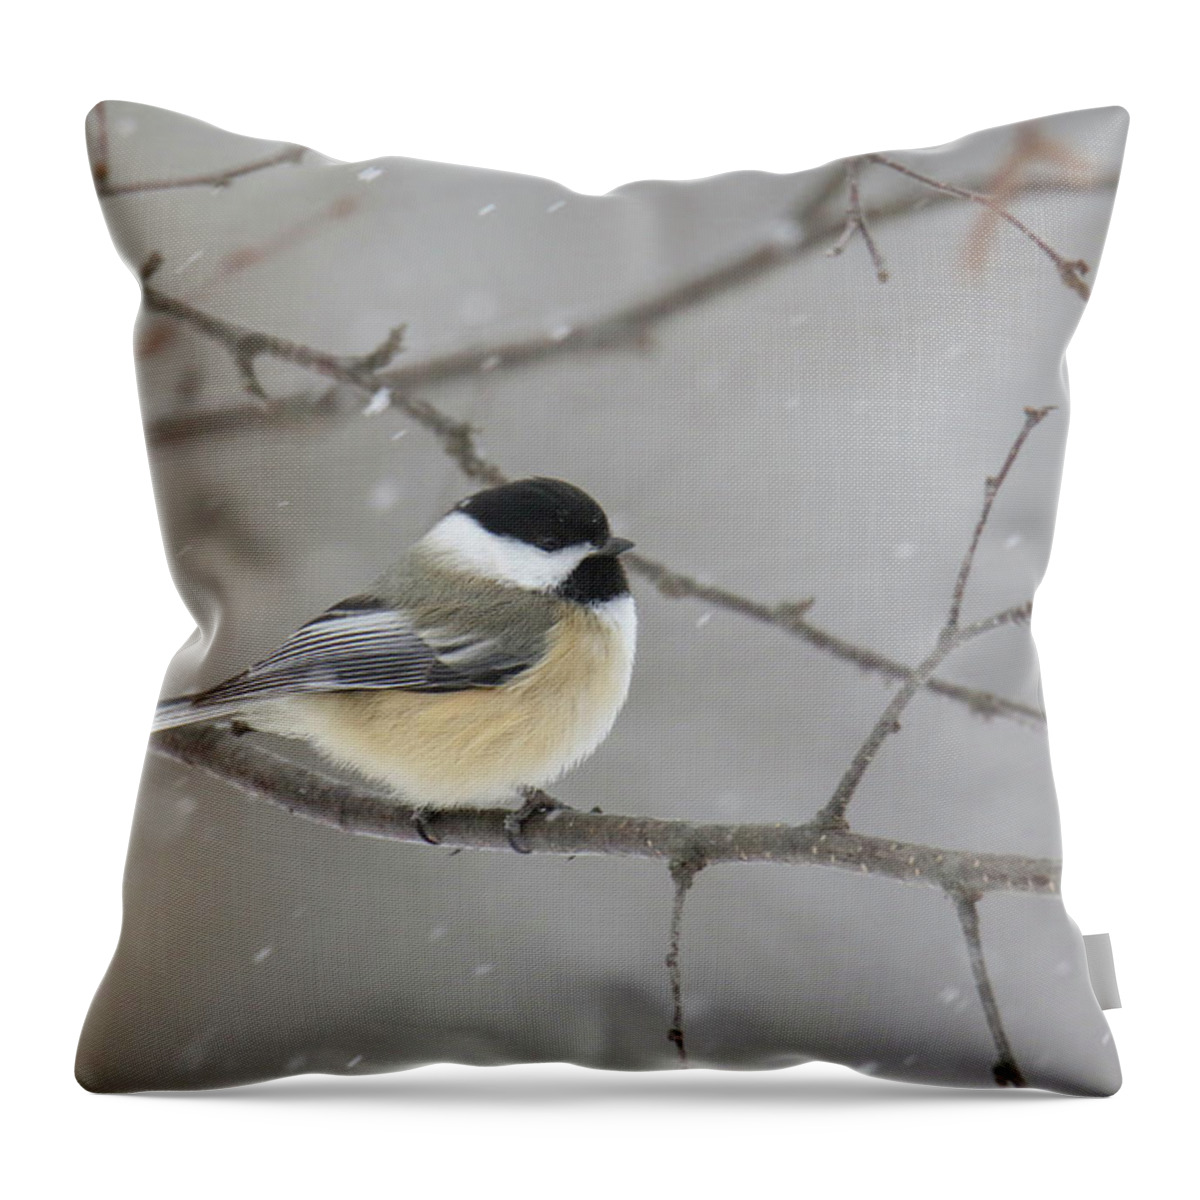 Chickadee Throw Pillow featuring the photograph Snowy Chickadee by Brook Burling